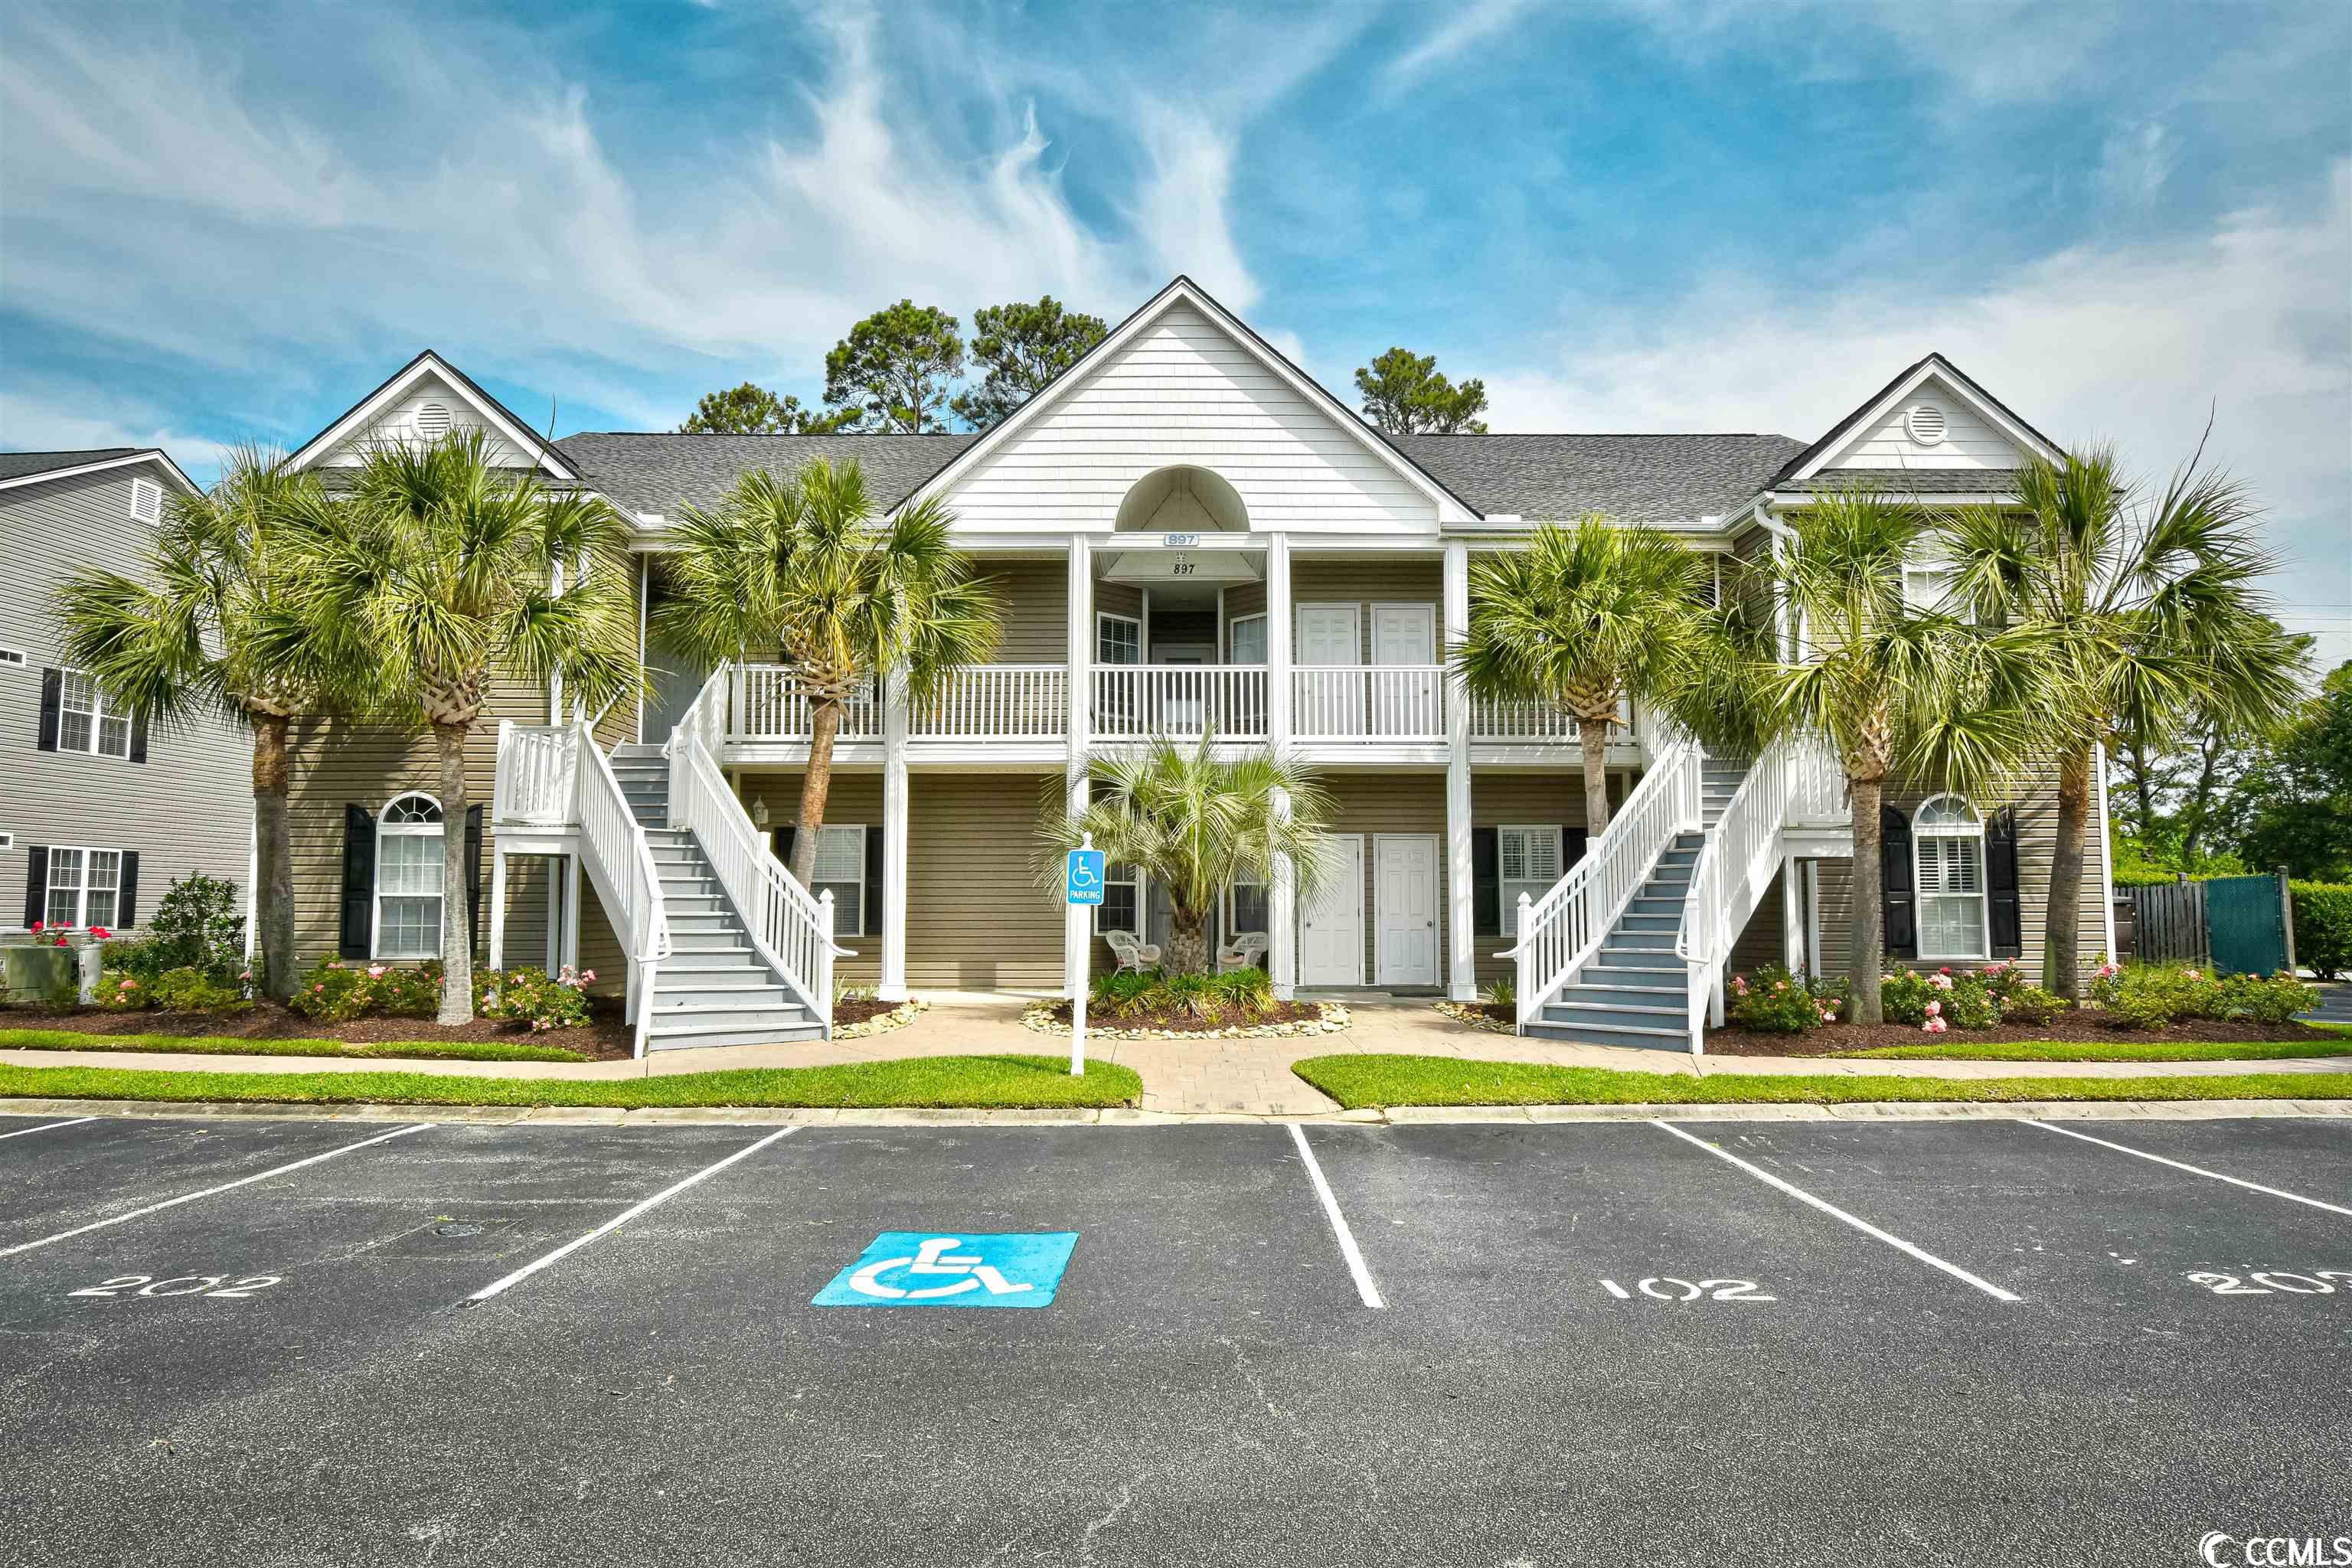 here is your opportunity to own a 3 bed - 2 full bath condo just 1 mile from the beach. this unit is in excellent condition with many new upgrades including - new furnace replaced in 2019, new roof in 2021, custom paint, carpet and water heater replaced in 2023. the master bedroom has an en-suite, walk-in closet, linen closet, plus attic storage. this unit also offers a large screened-in porch with view of whispering pines golf course and pond. palmetto park is close to beaches, shopping, market common, myrtle beach state park,golf courses and the myrtle beach airport!! with the pool located directly across the parking lot and the beach just a few blocks away.schedule your showing today!